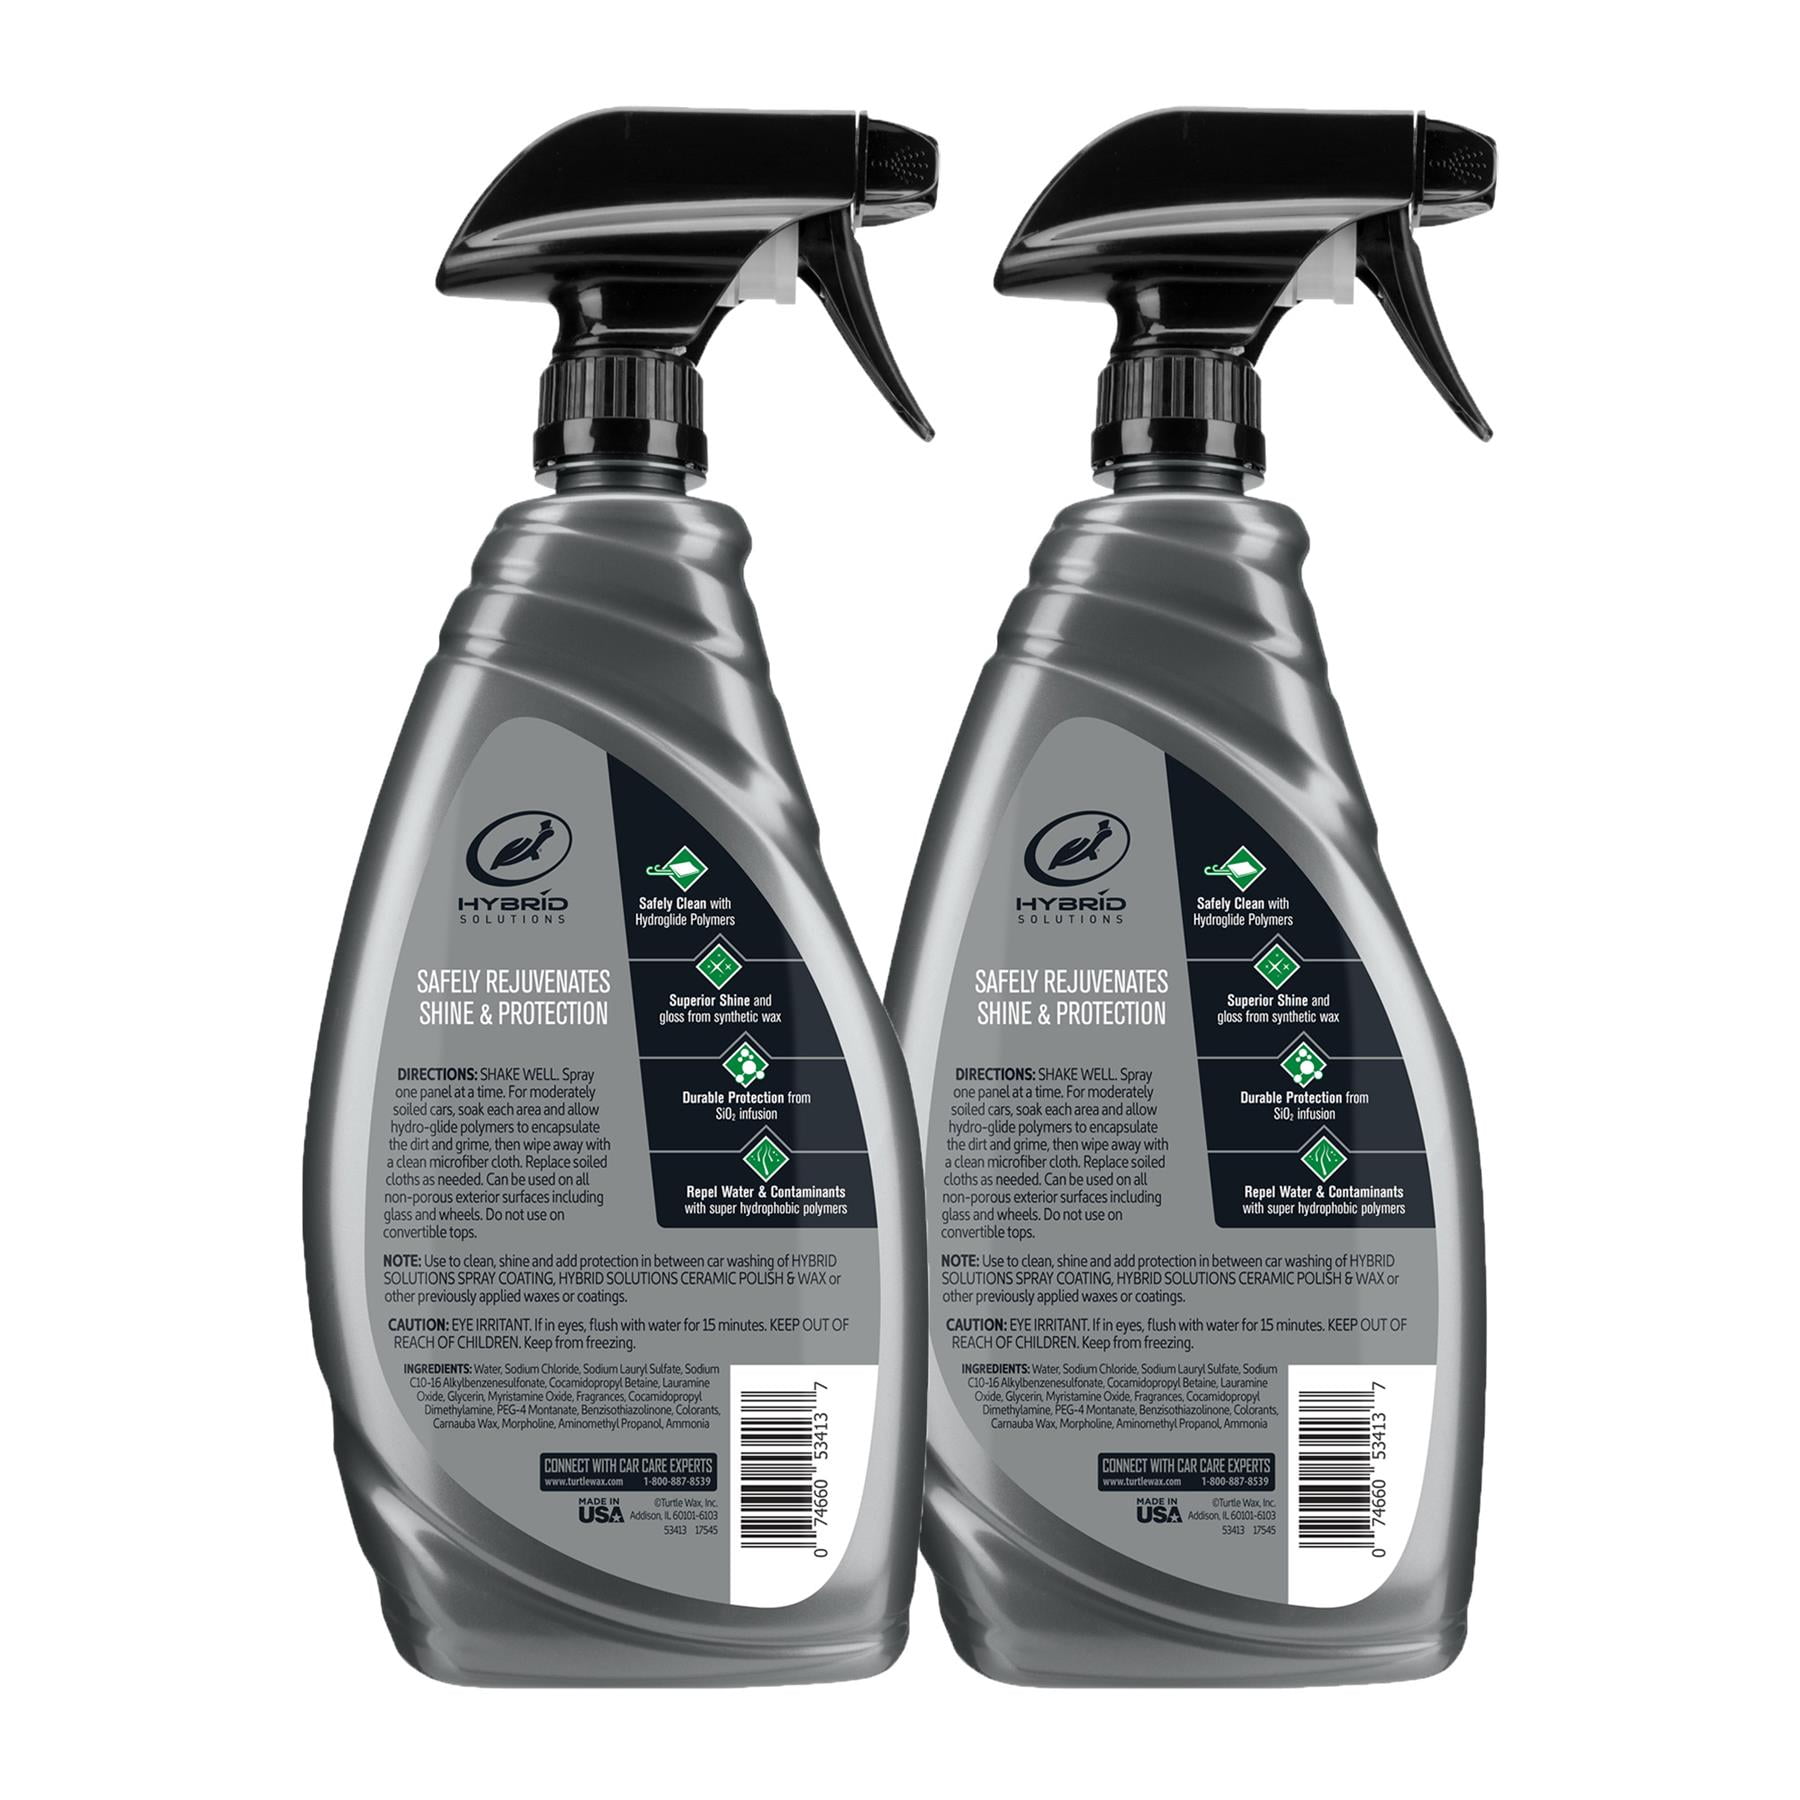 Product Test: Turtle Wax Hybrid Solutions Ceramic Spray Coating